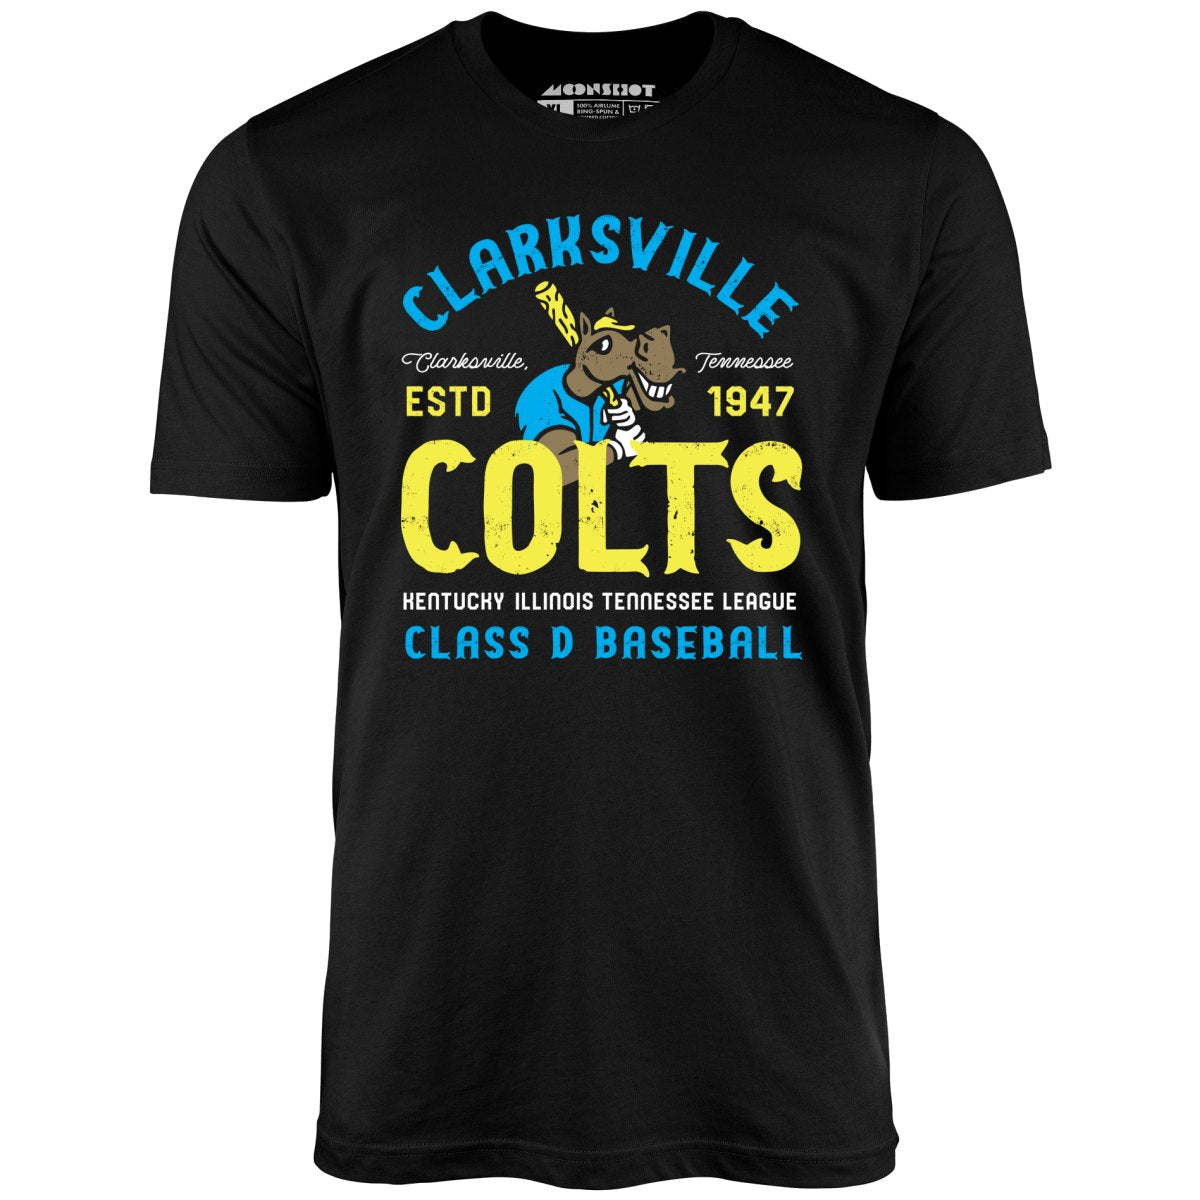 Clarksville Colts - Tennessee - Vintage Defunct Baseball Teams - Unisex T-Shirt